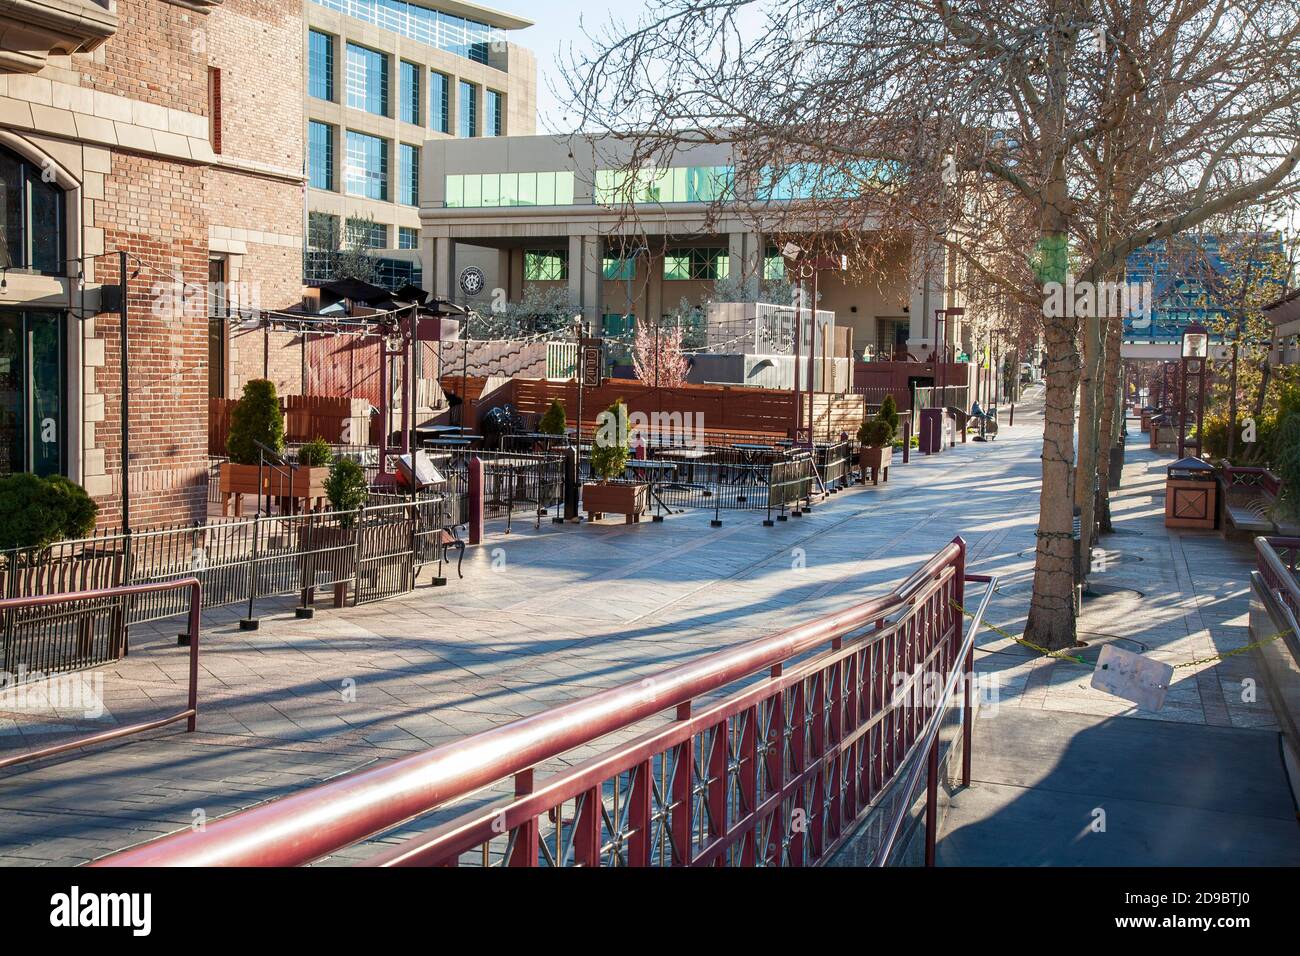 RENO, NEVADA - APRIL 1, 2020 - The normally busy 'River Walk' area in downtown Reno is eerily quiet amid the COVID-19 shutdown Stock Photo